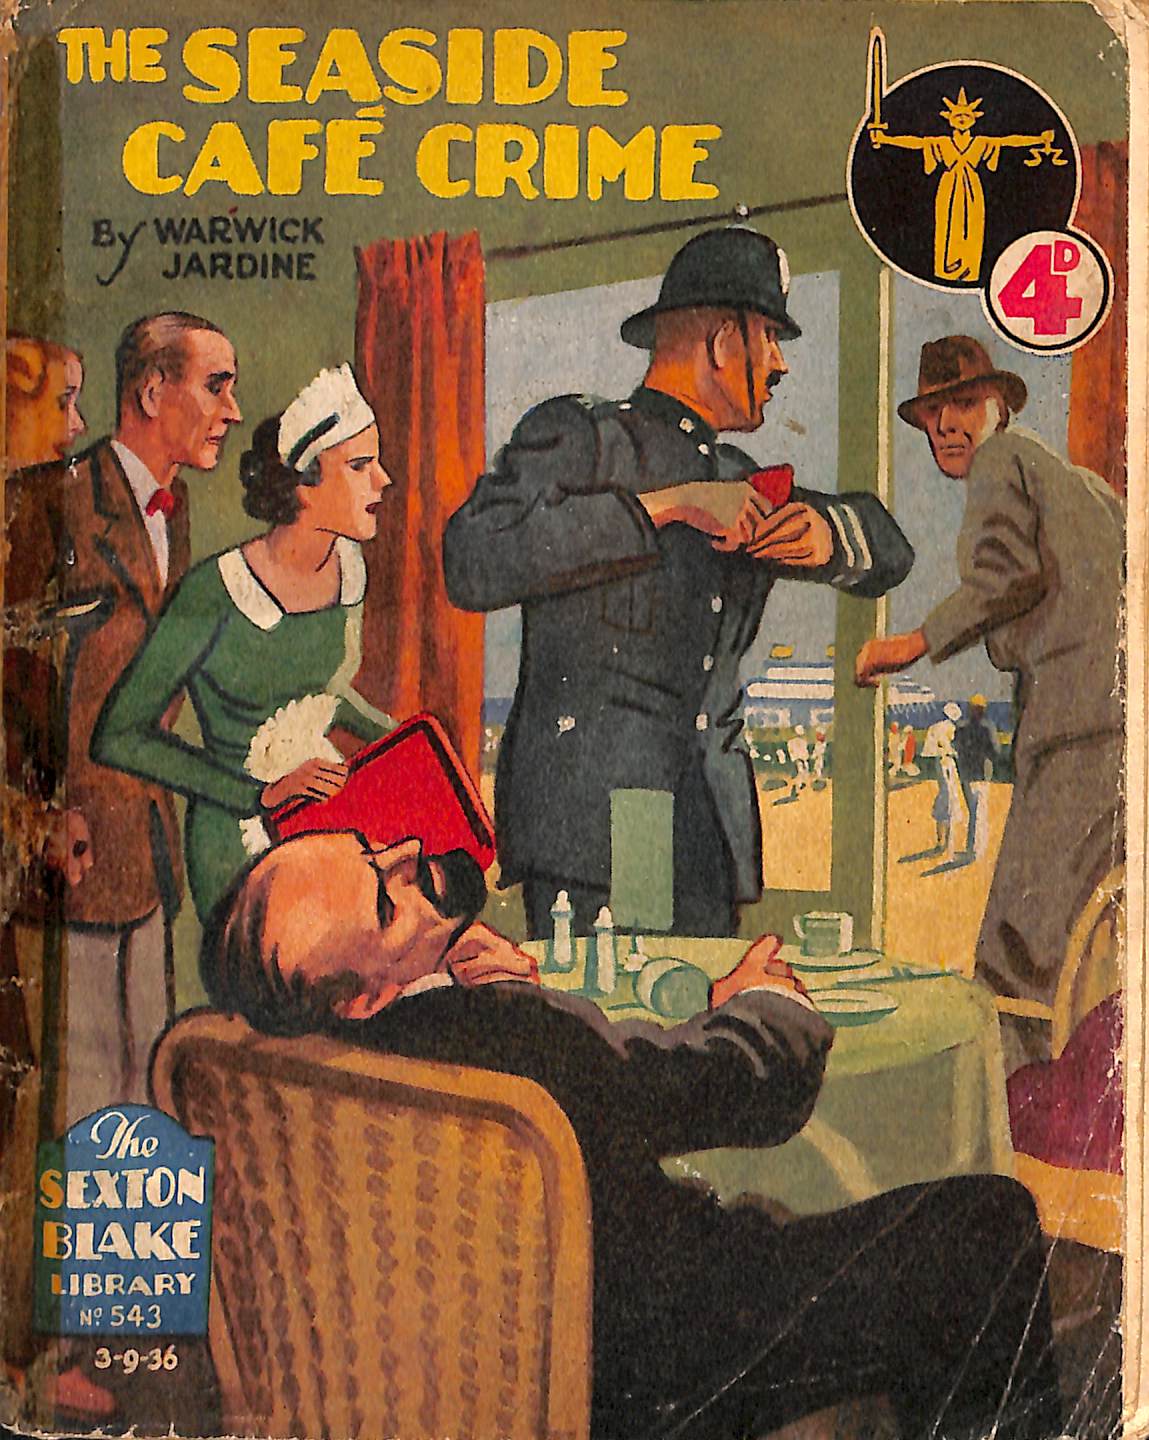 Book Cover For Sexton Blake Library S2 543 - The Seaside Cafe Crime